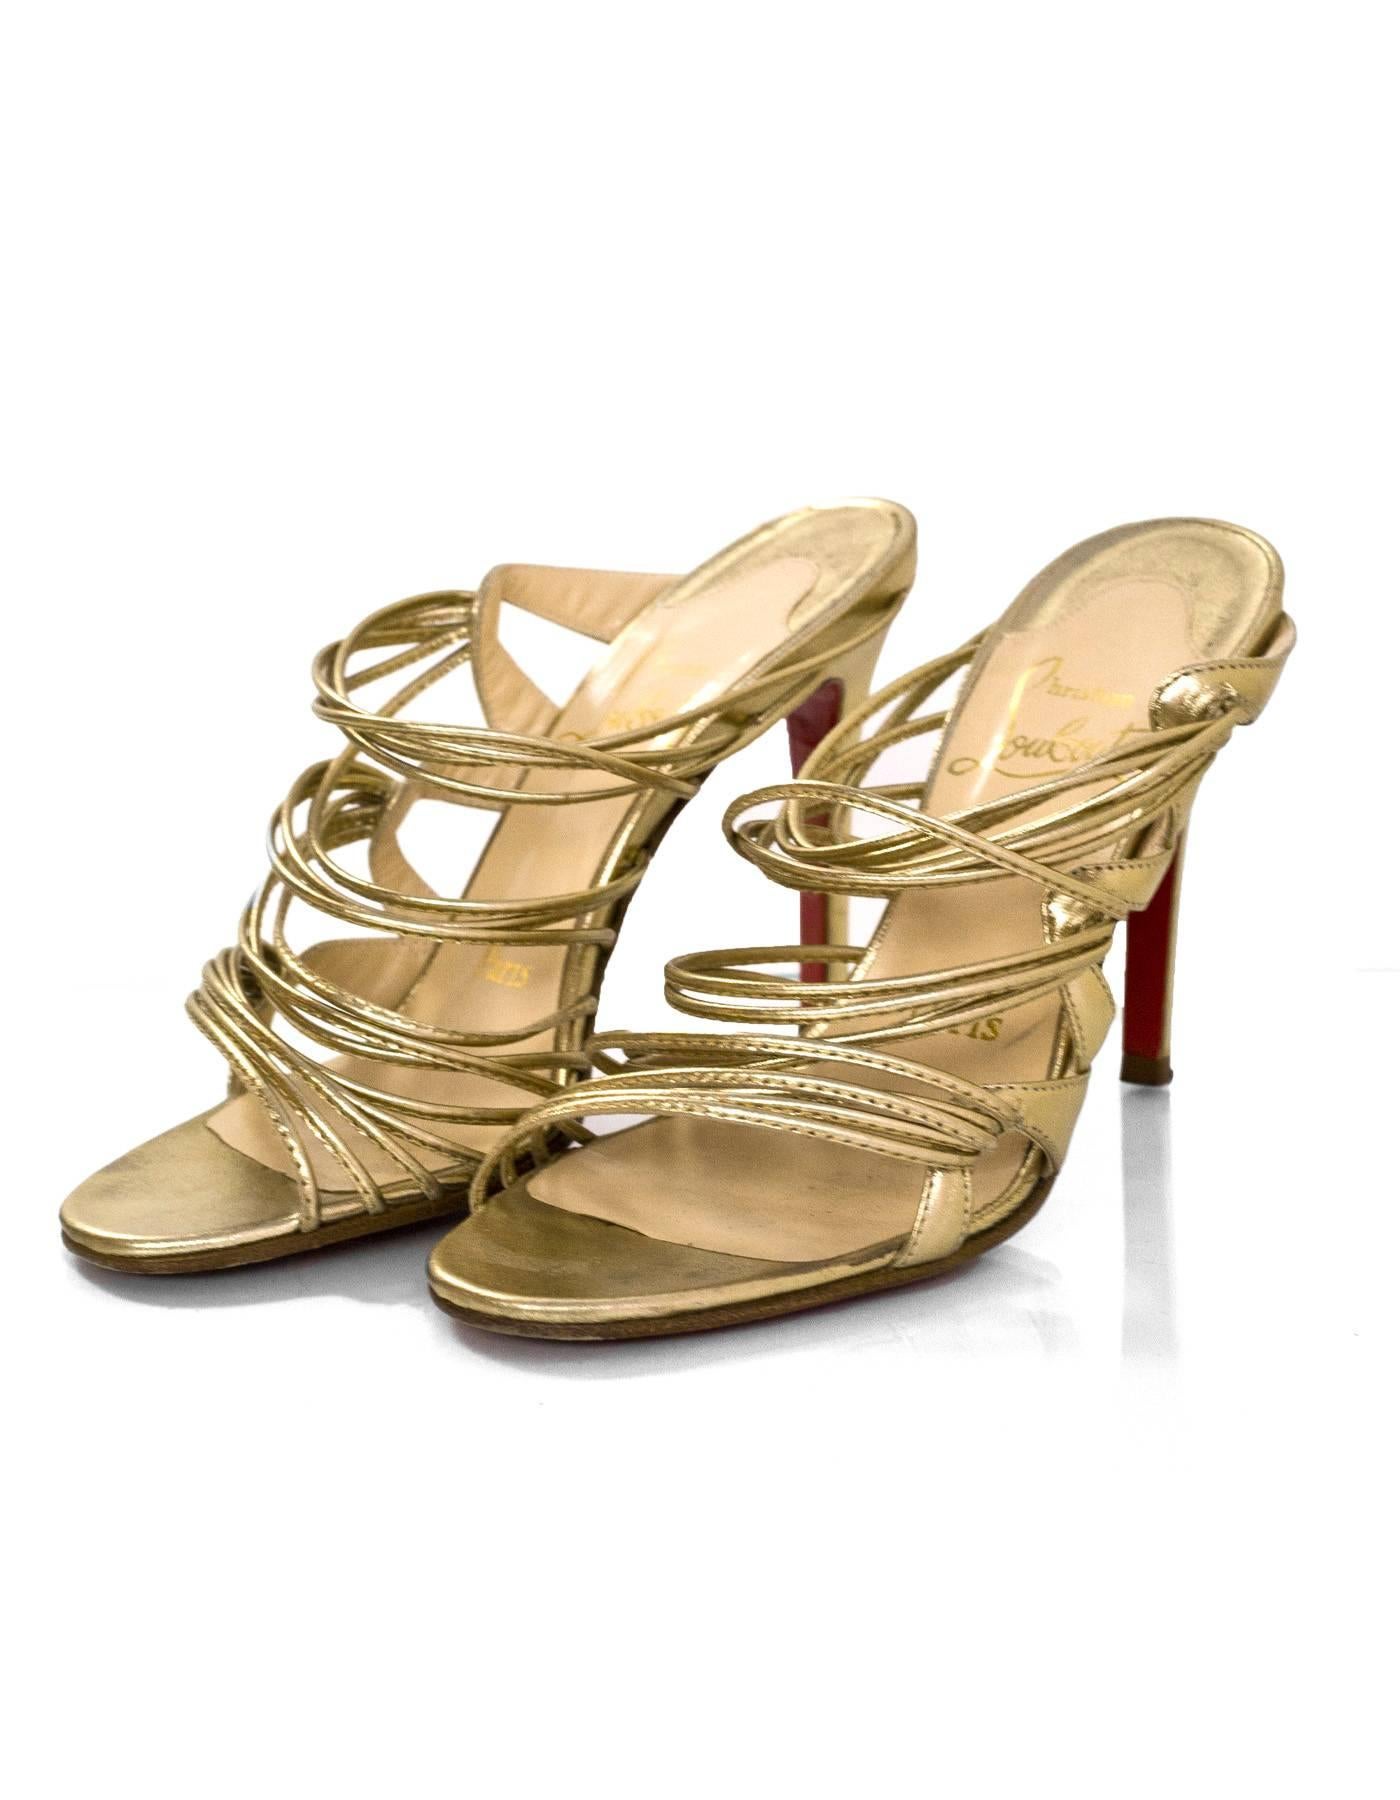 Christian Louboutin Gold Strappy Sandals Sz 35.5

Made In: Italy
Color: Gold
Materials: Leather
Closure/Opening: Slide-on
Sole Stamp: Christian Louboutin Made in Italy 35.5
Overall Condition: Excellent pre-owned condition with the exception of some